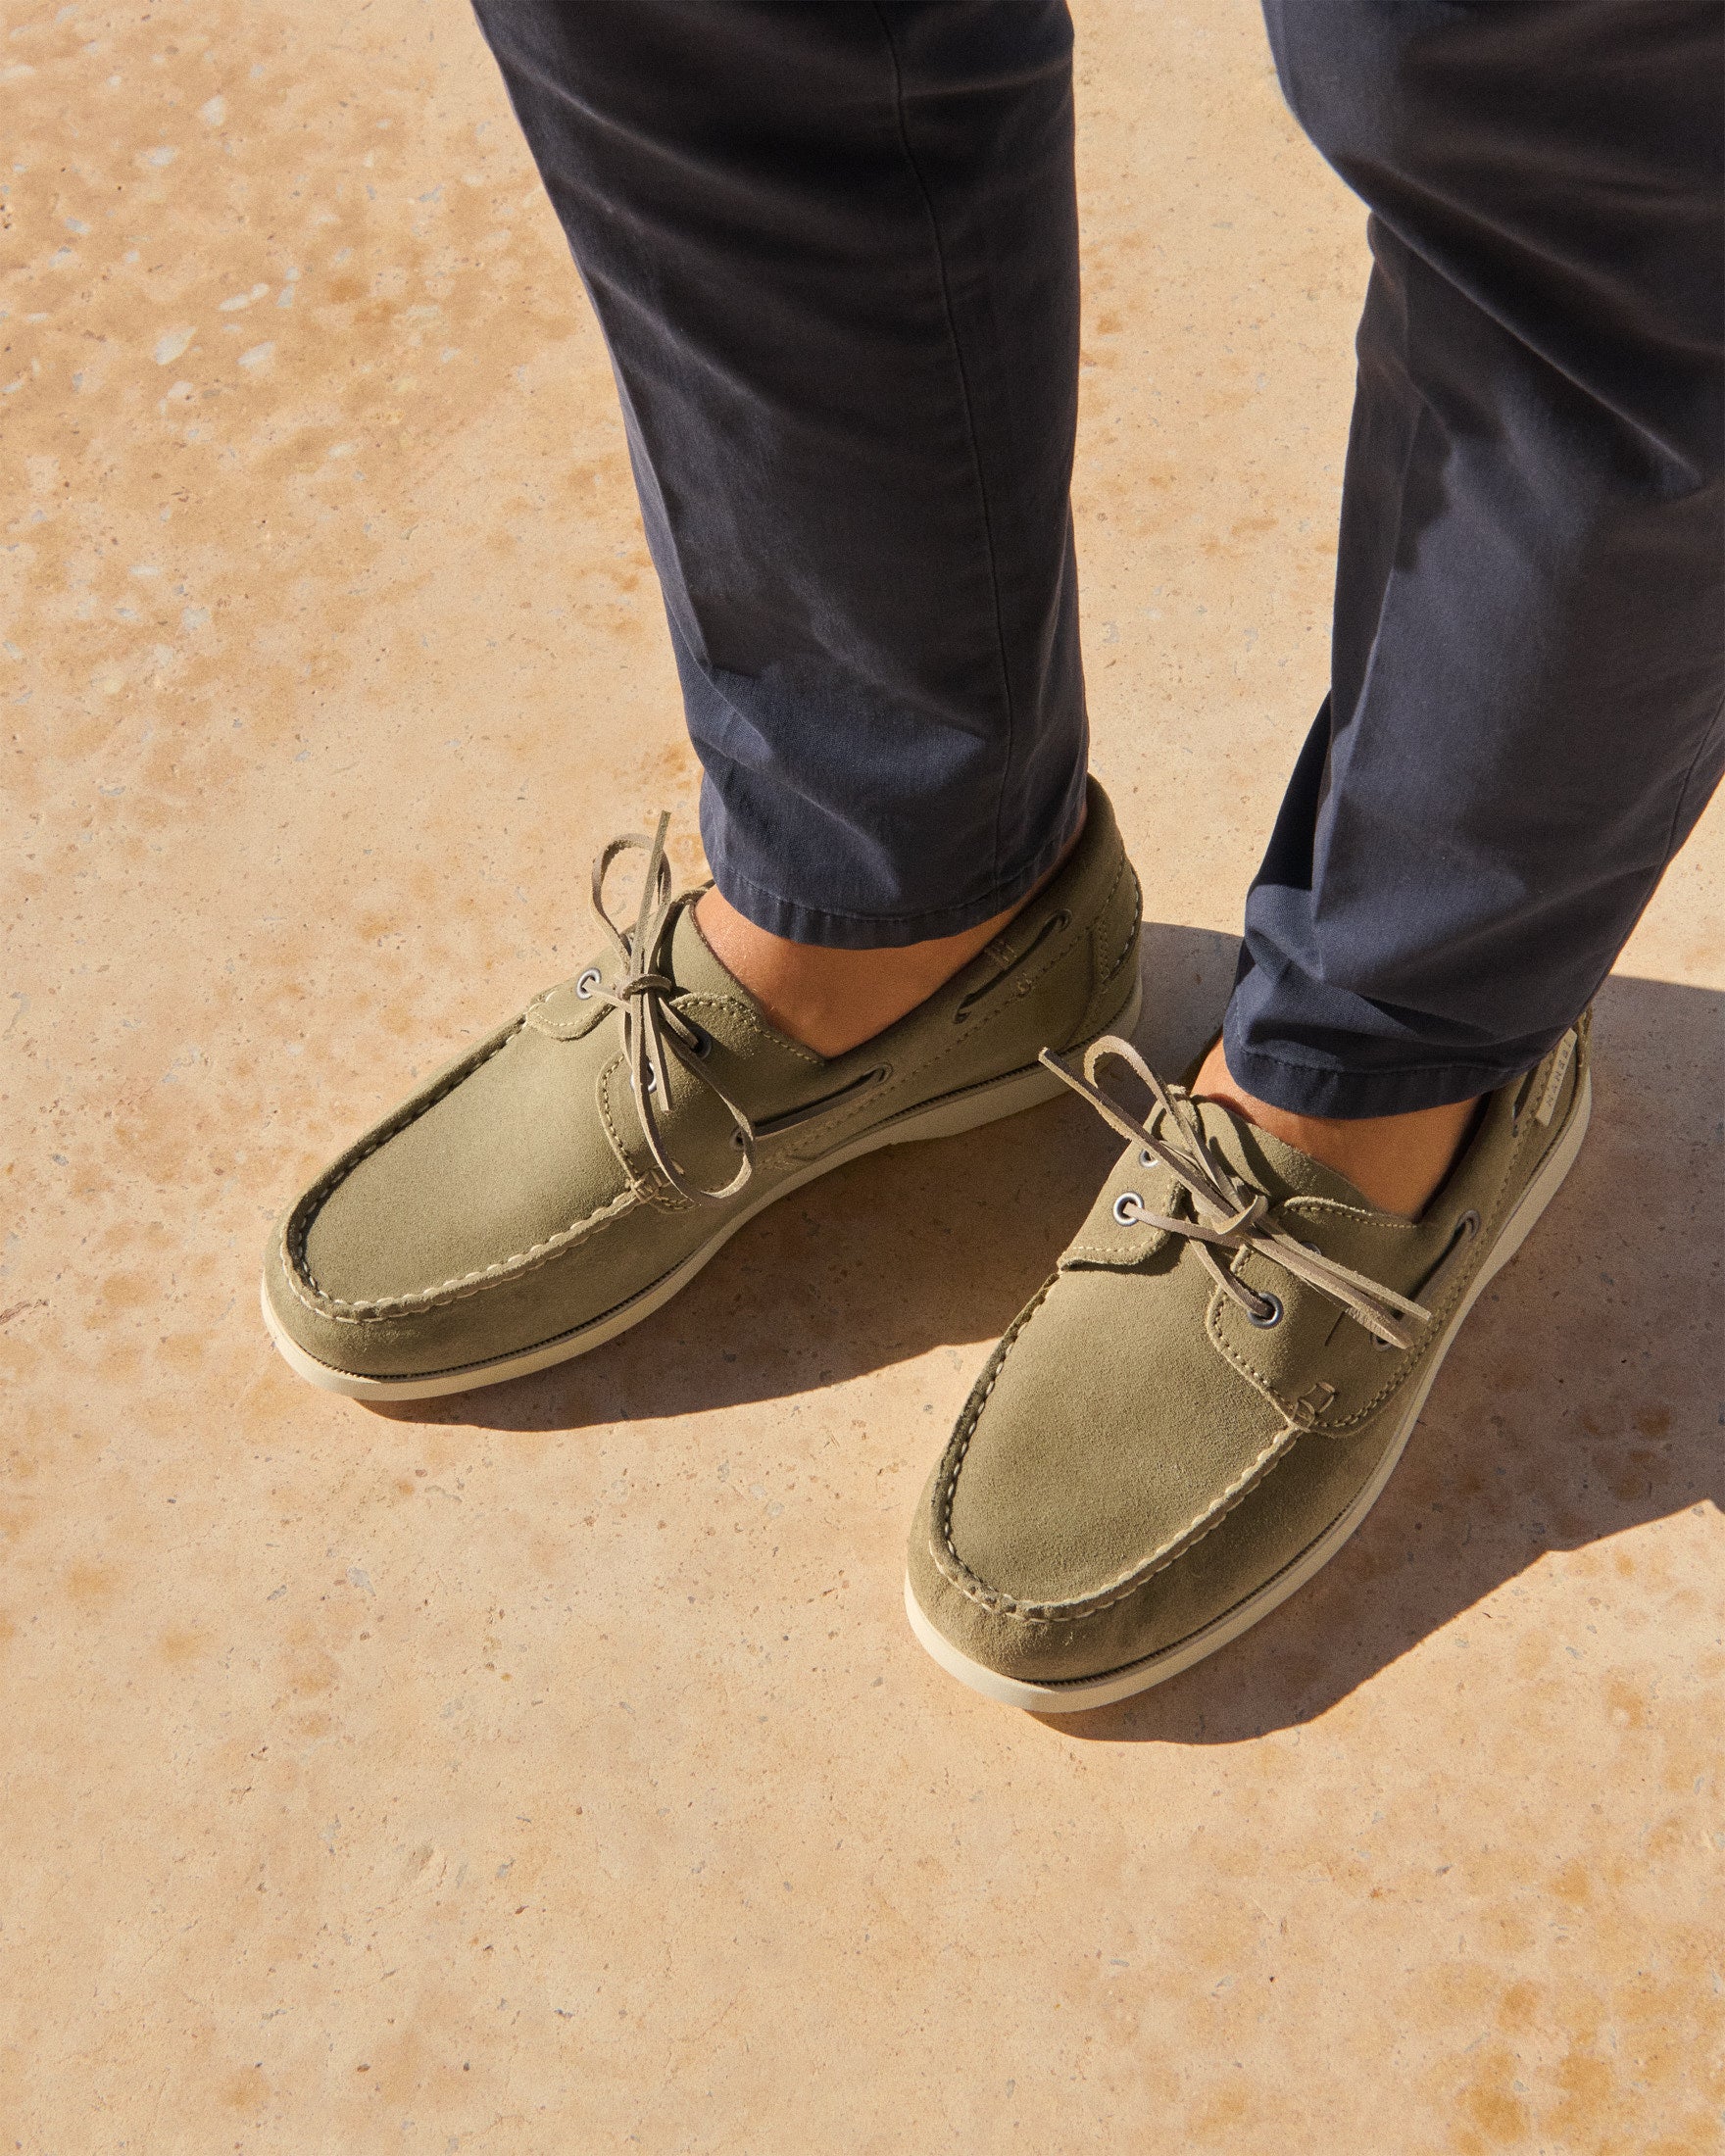 Natural Suede Boat Shoe | Gustin | Shoes | Boat Shoes